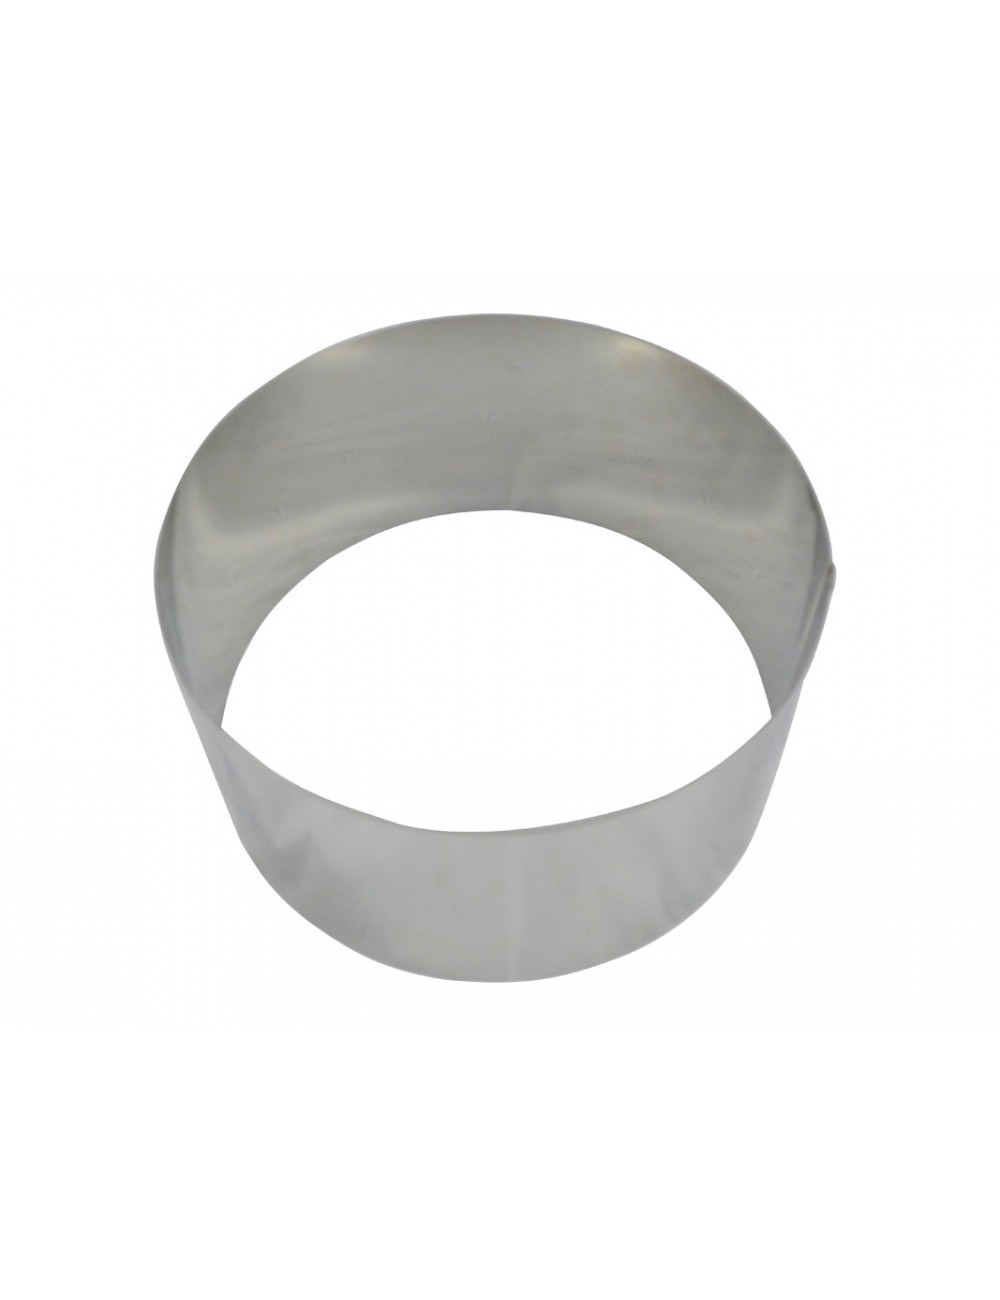 PARTY BREAD RING - STAINLESS STEEL